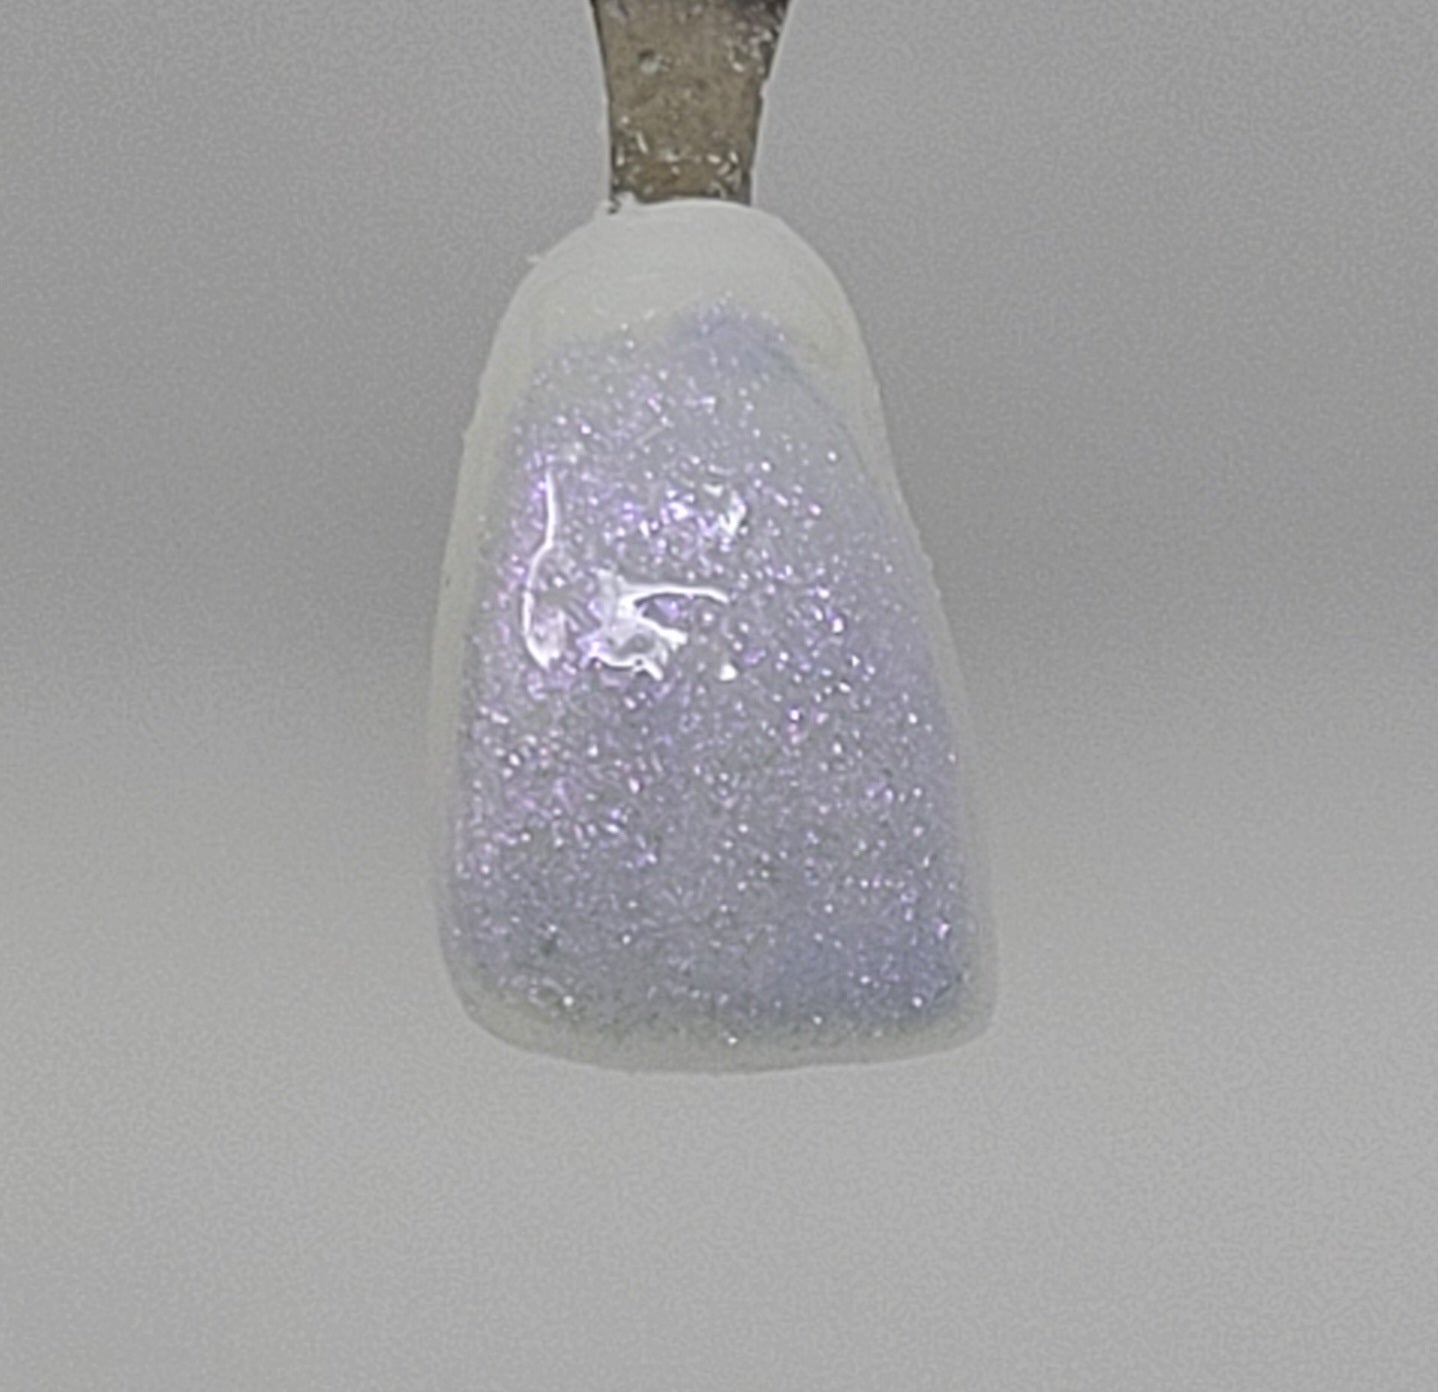 Violet Opal Temporary Tattooth Colorant on a demo tooth.  These colorants can be applied to teeth to temporarily alter their color or iridescence.